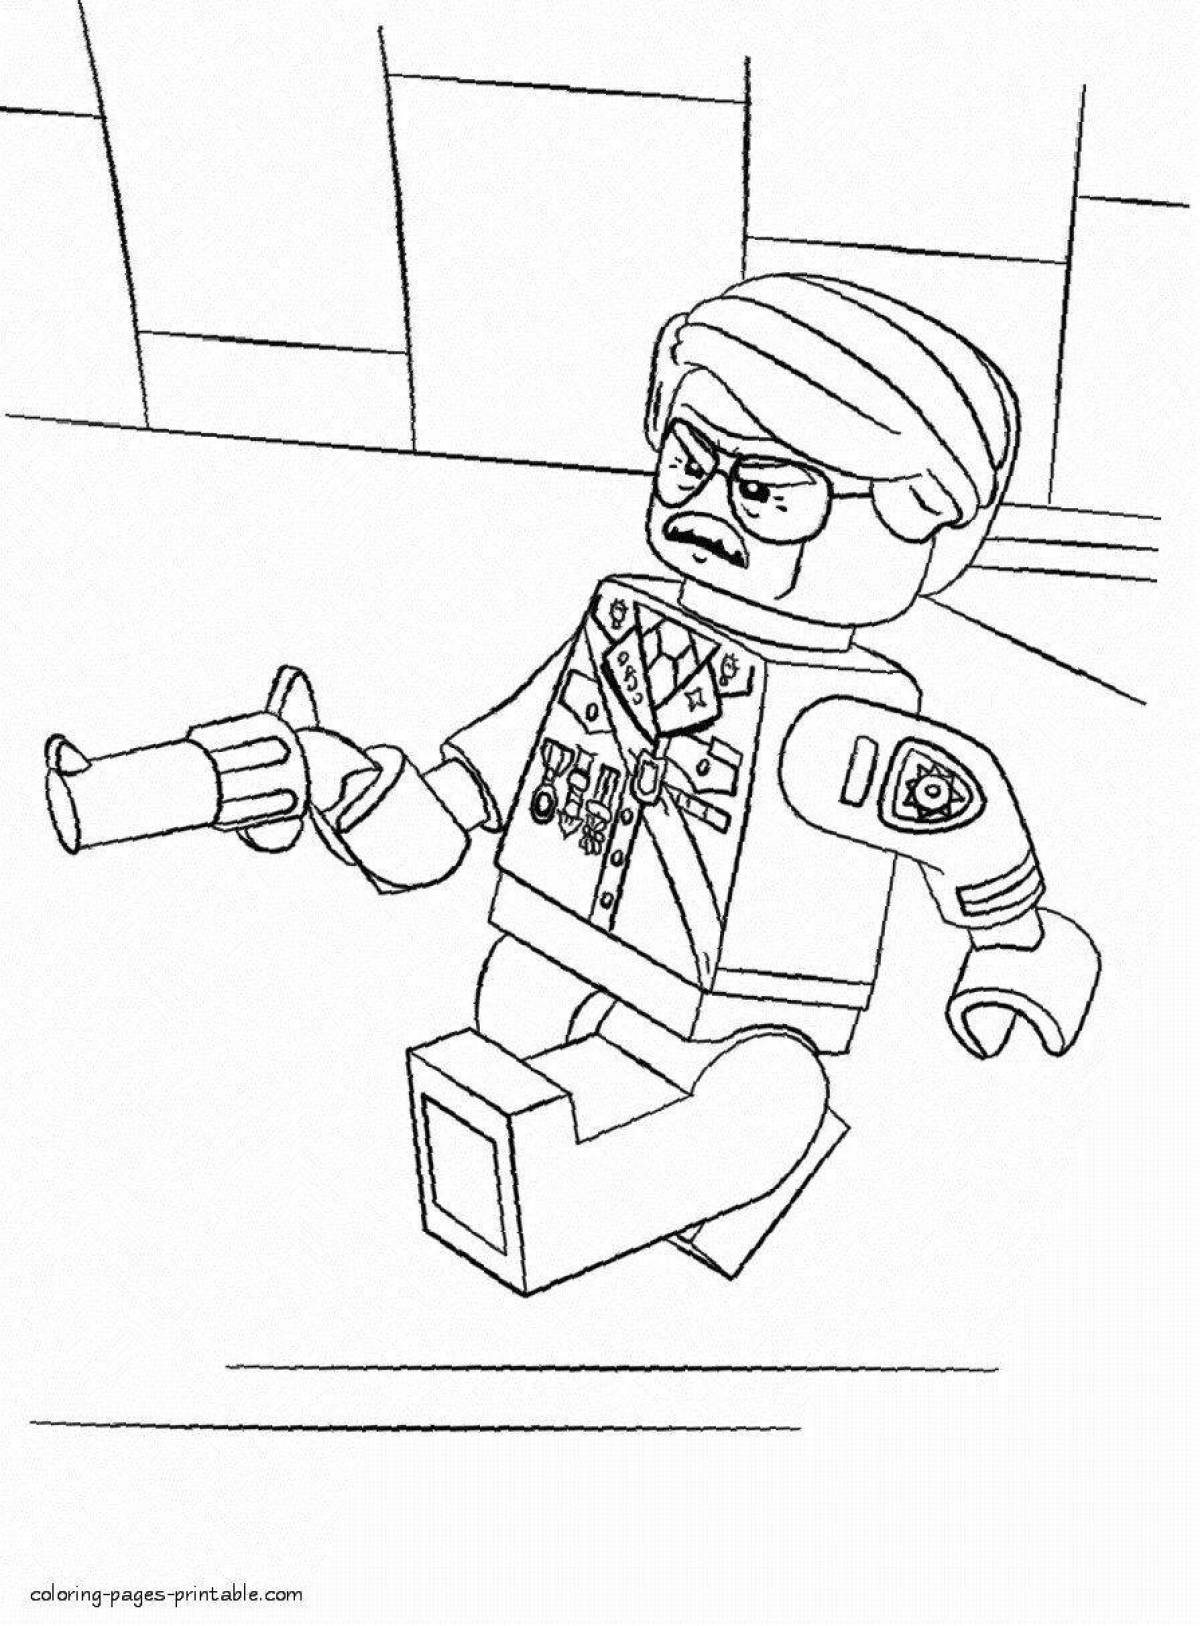 Coloring mystical lego zombie